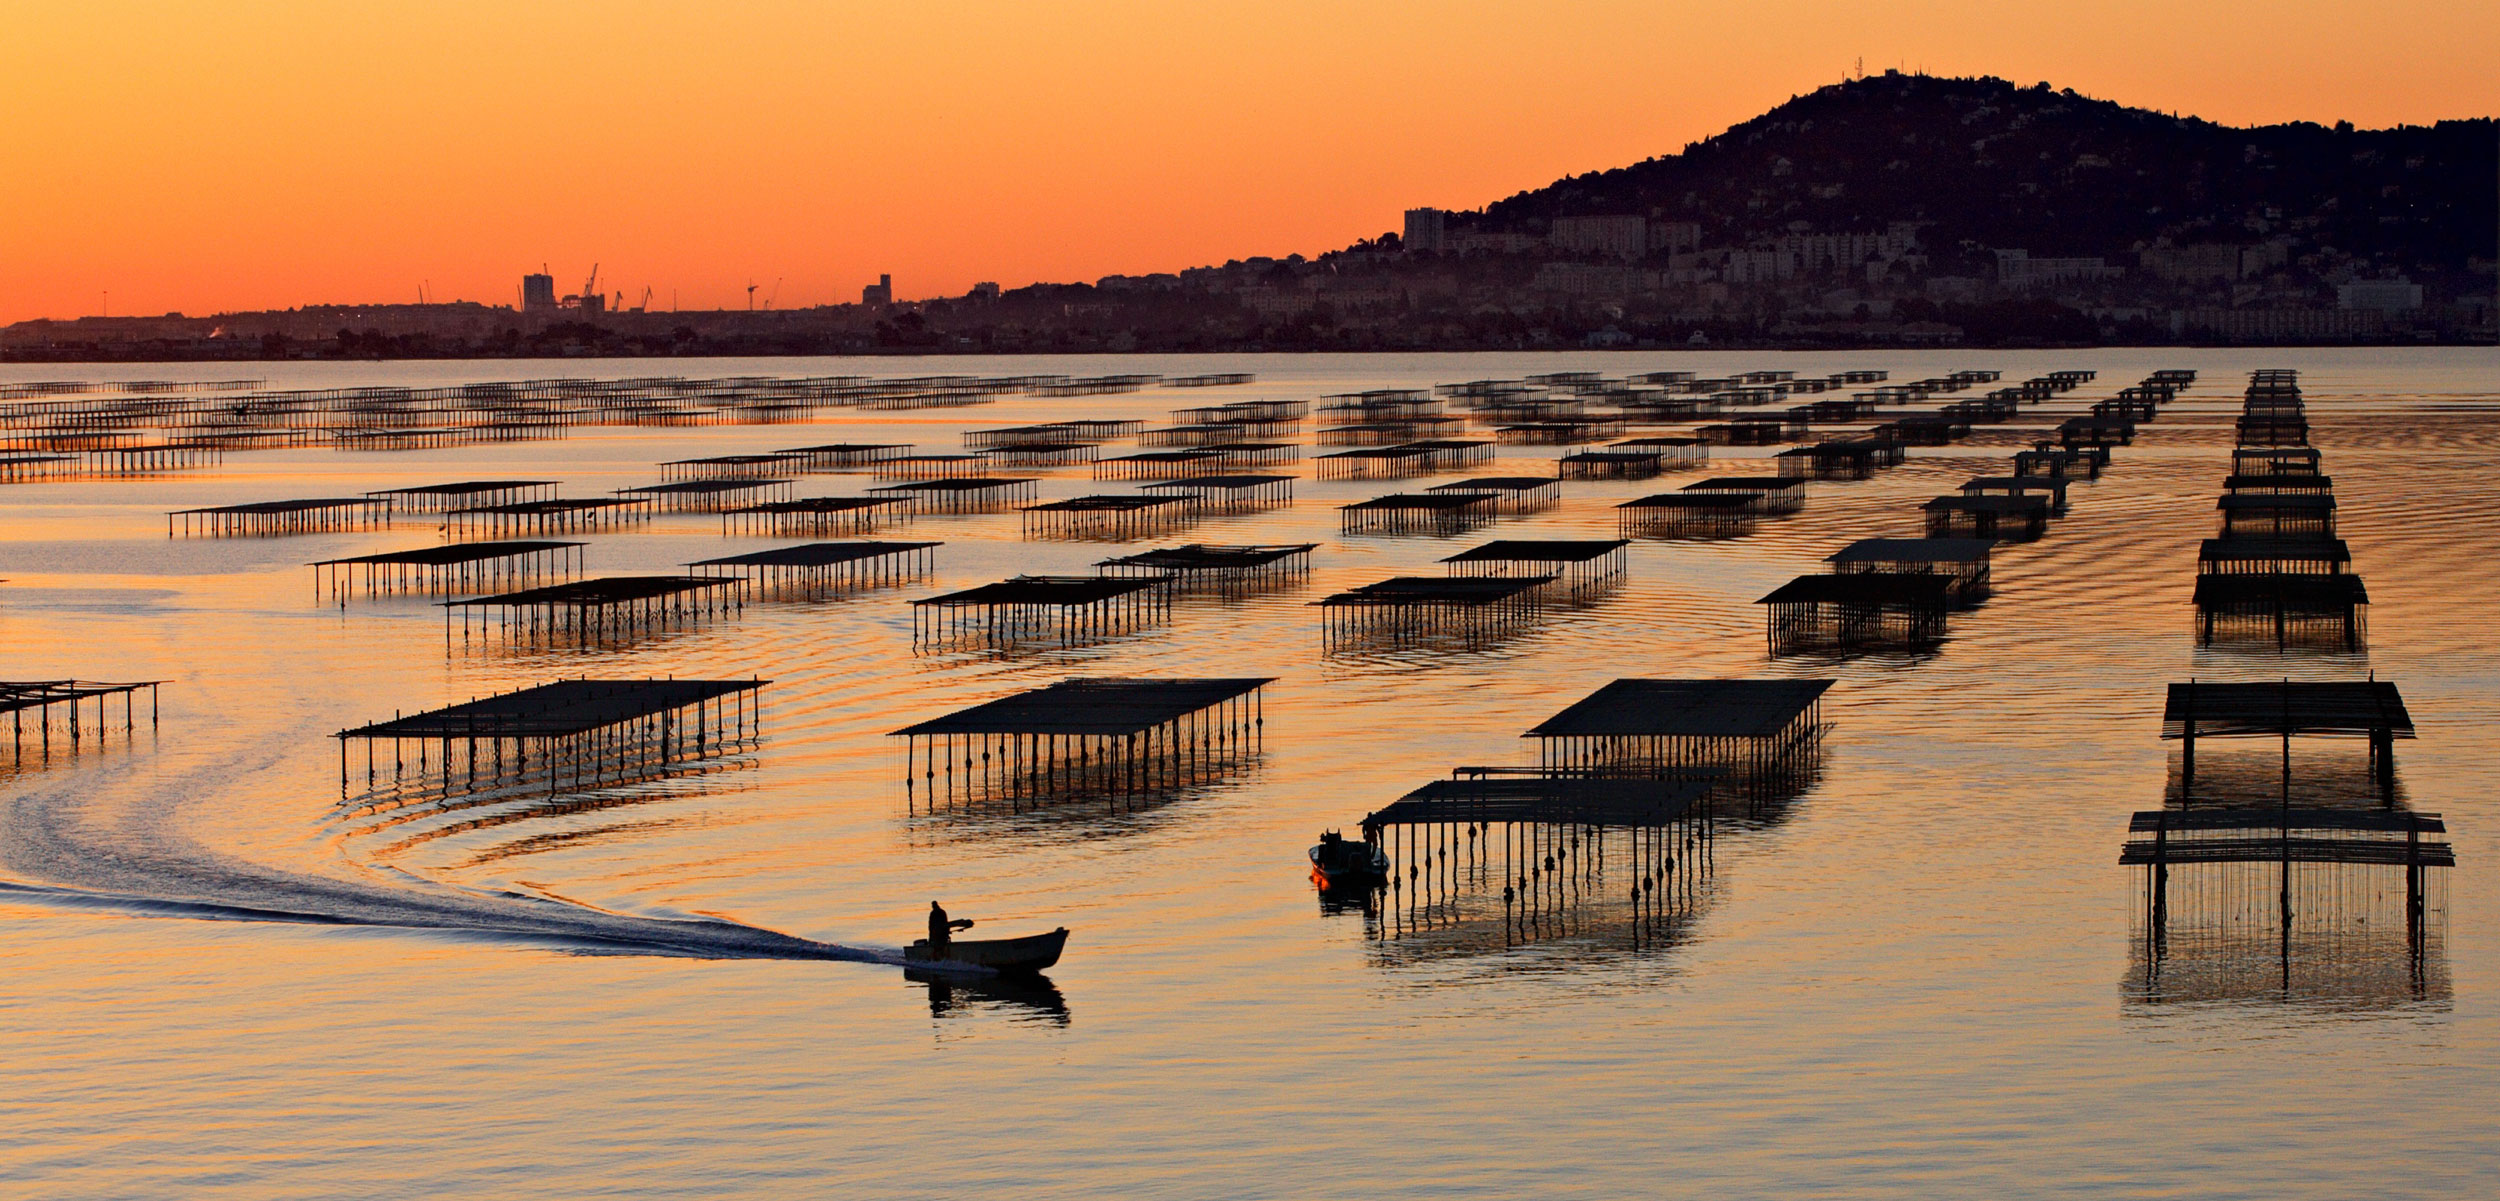 Etang de Thau and oyster farming in Languedoc Roussillon, France